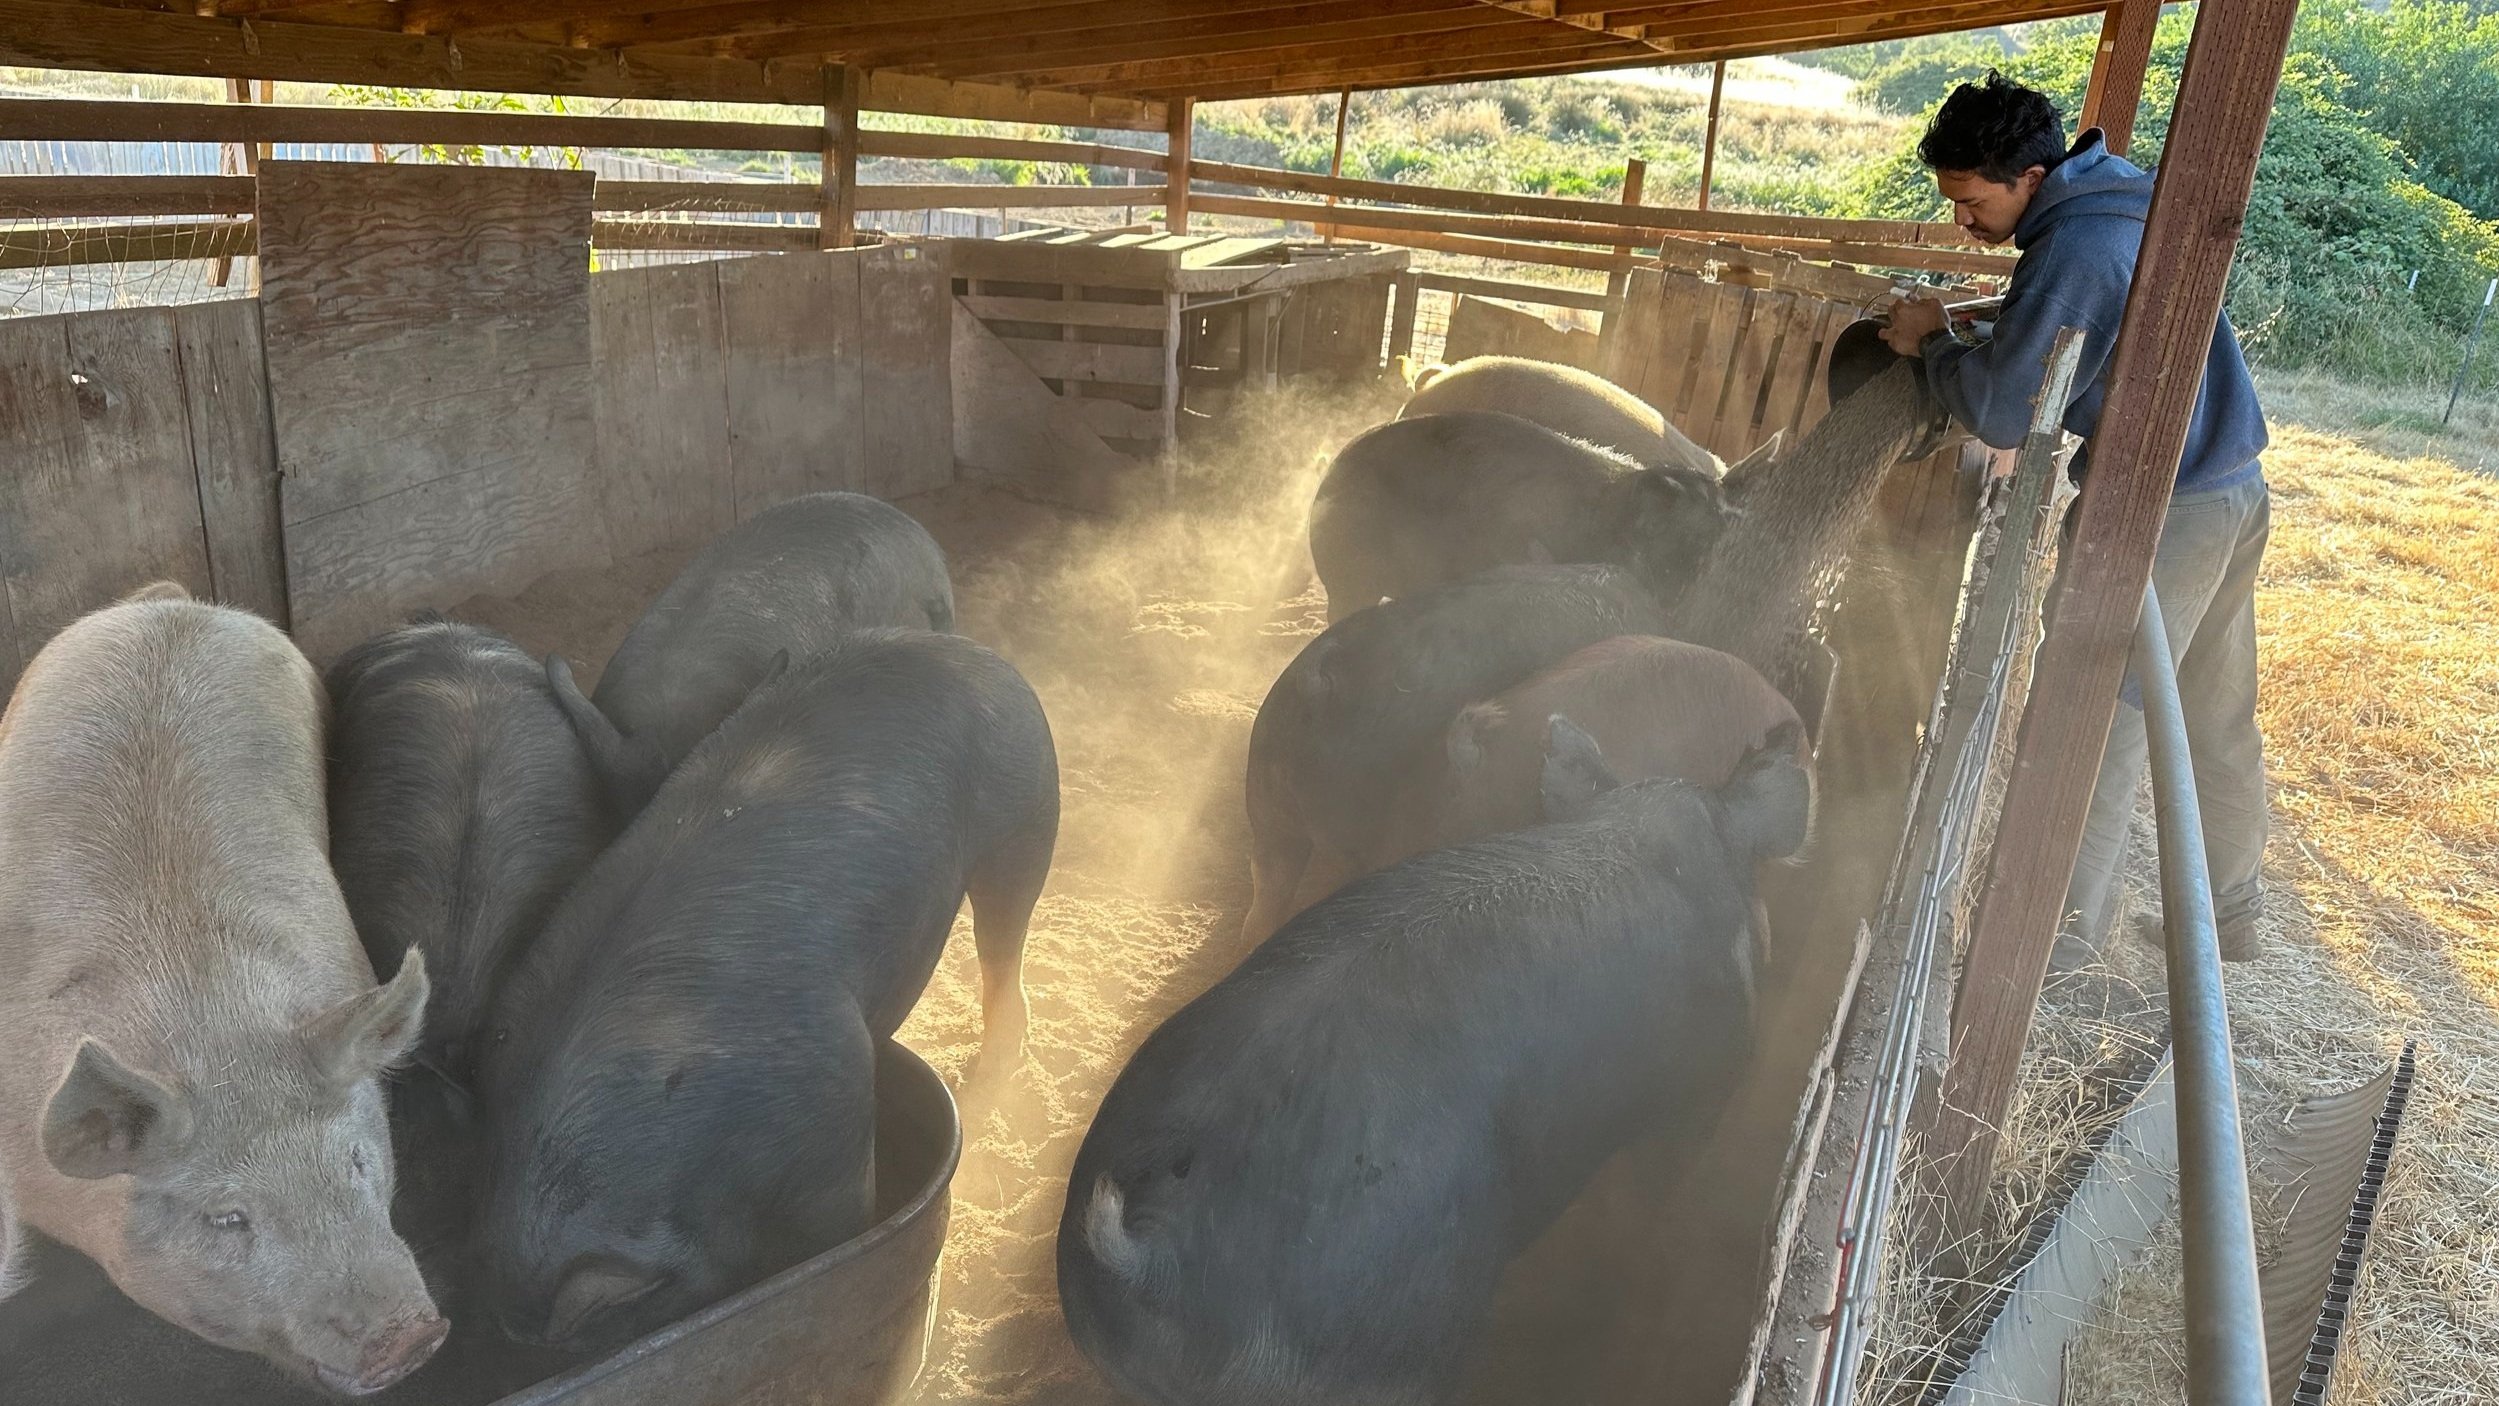 Giving supplemental feed to the pigs